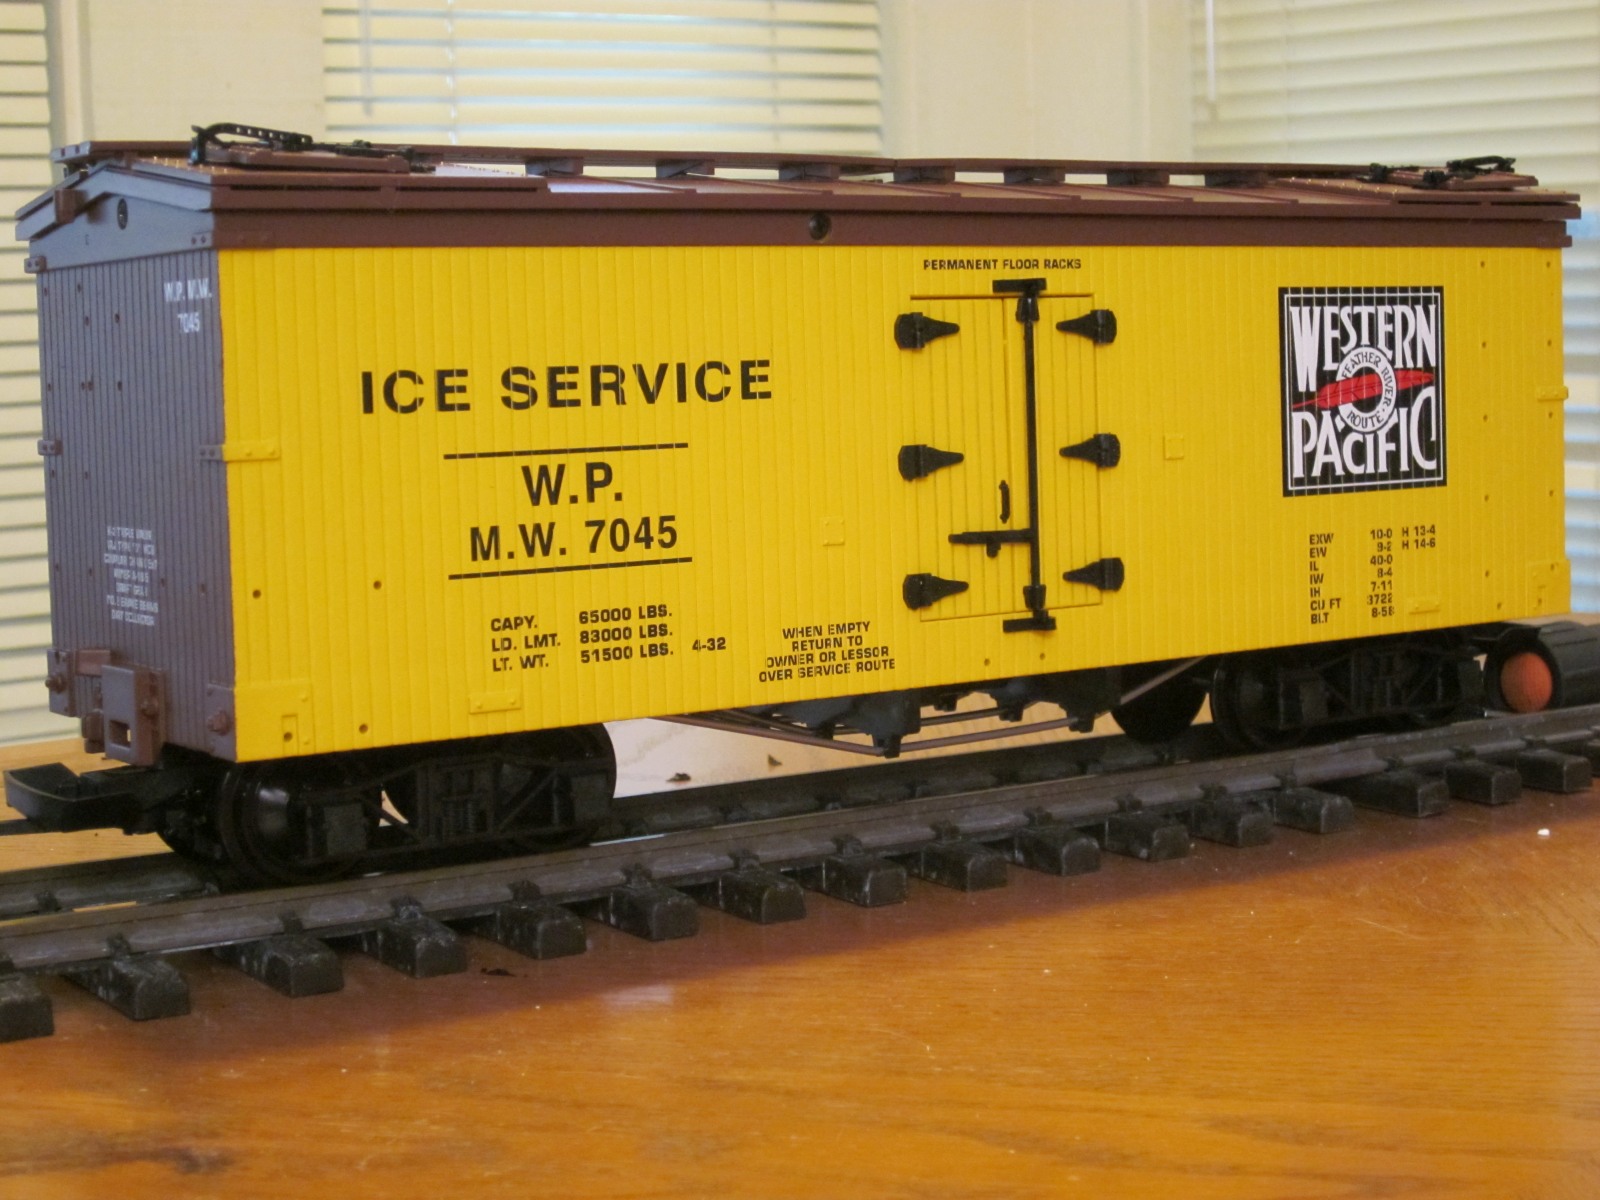 R16296 Western Pacific Ice Service WP MW 7045